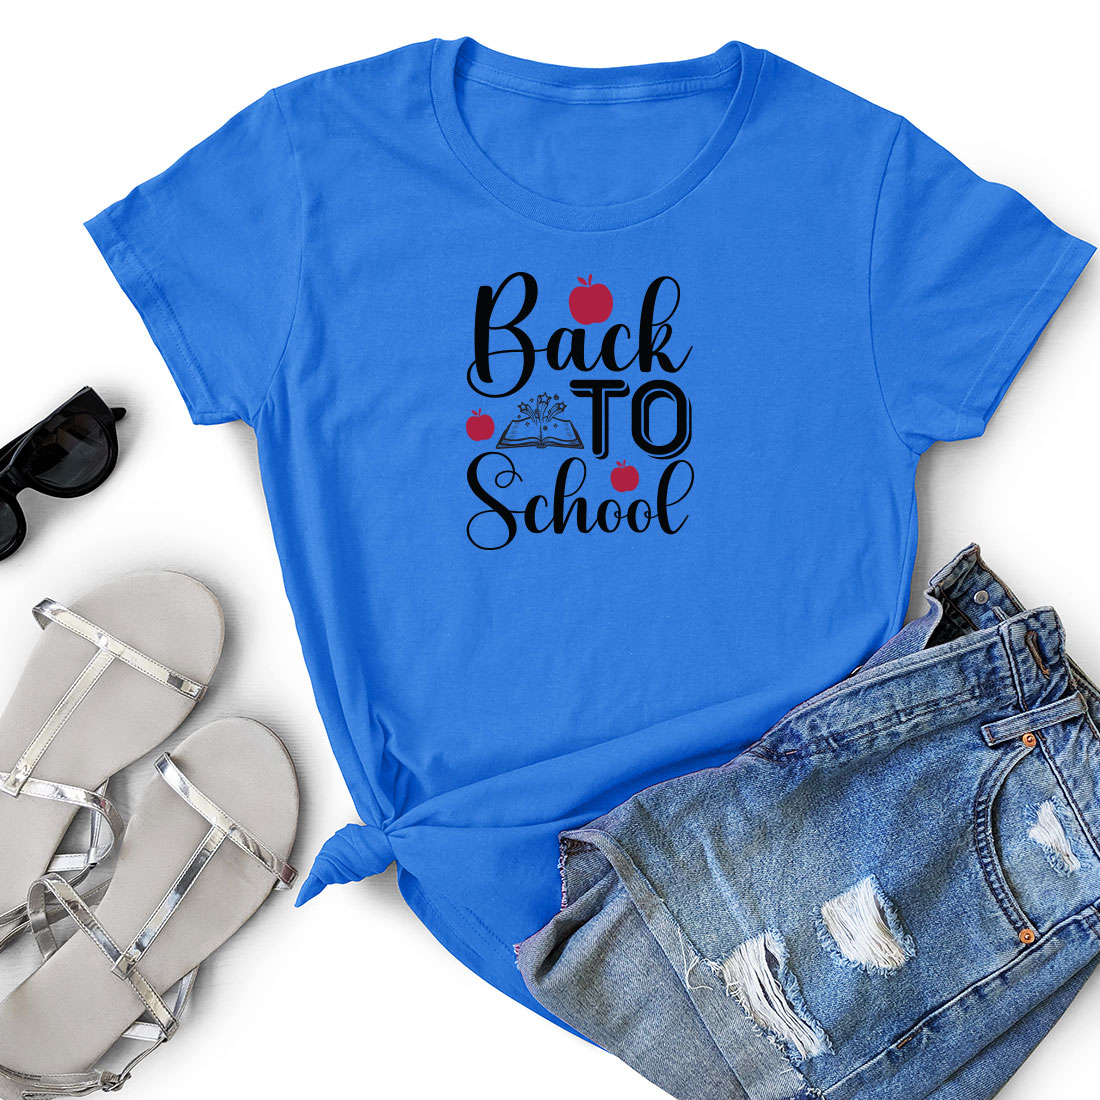 Blue shirt that says back to school next to a pair of shorts.